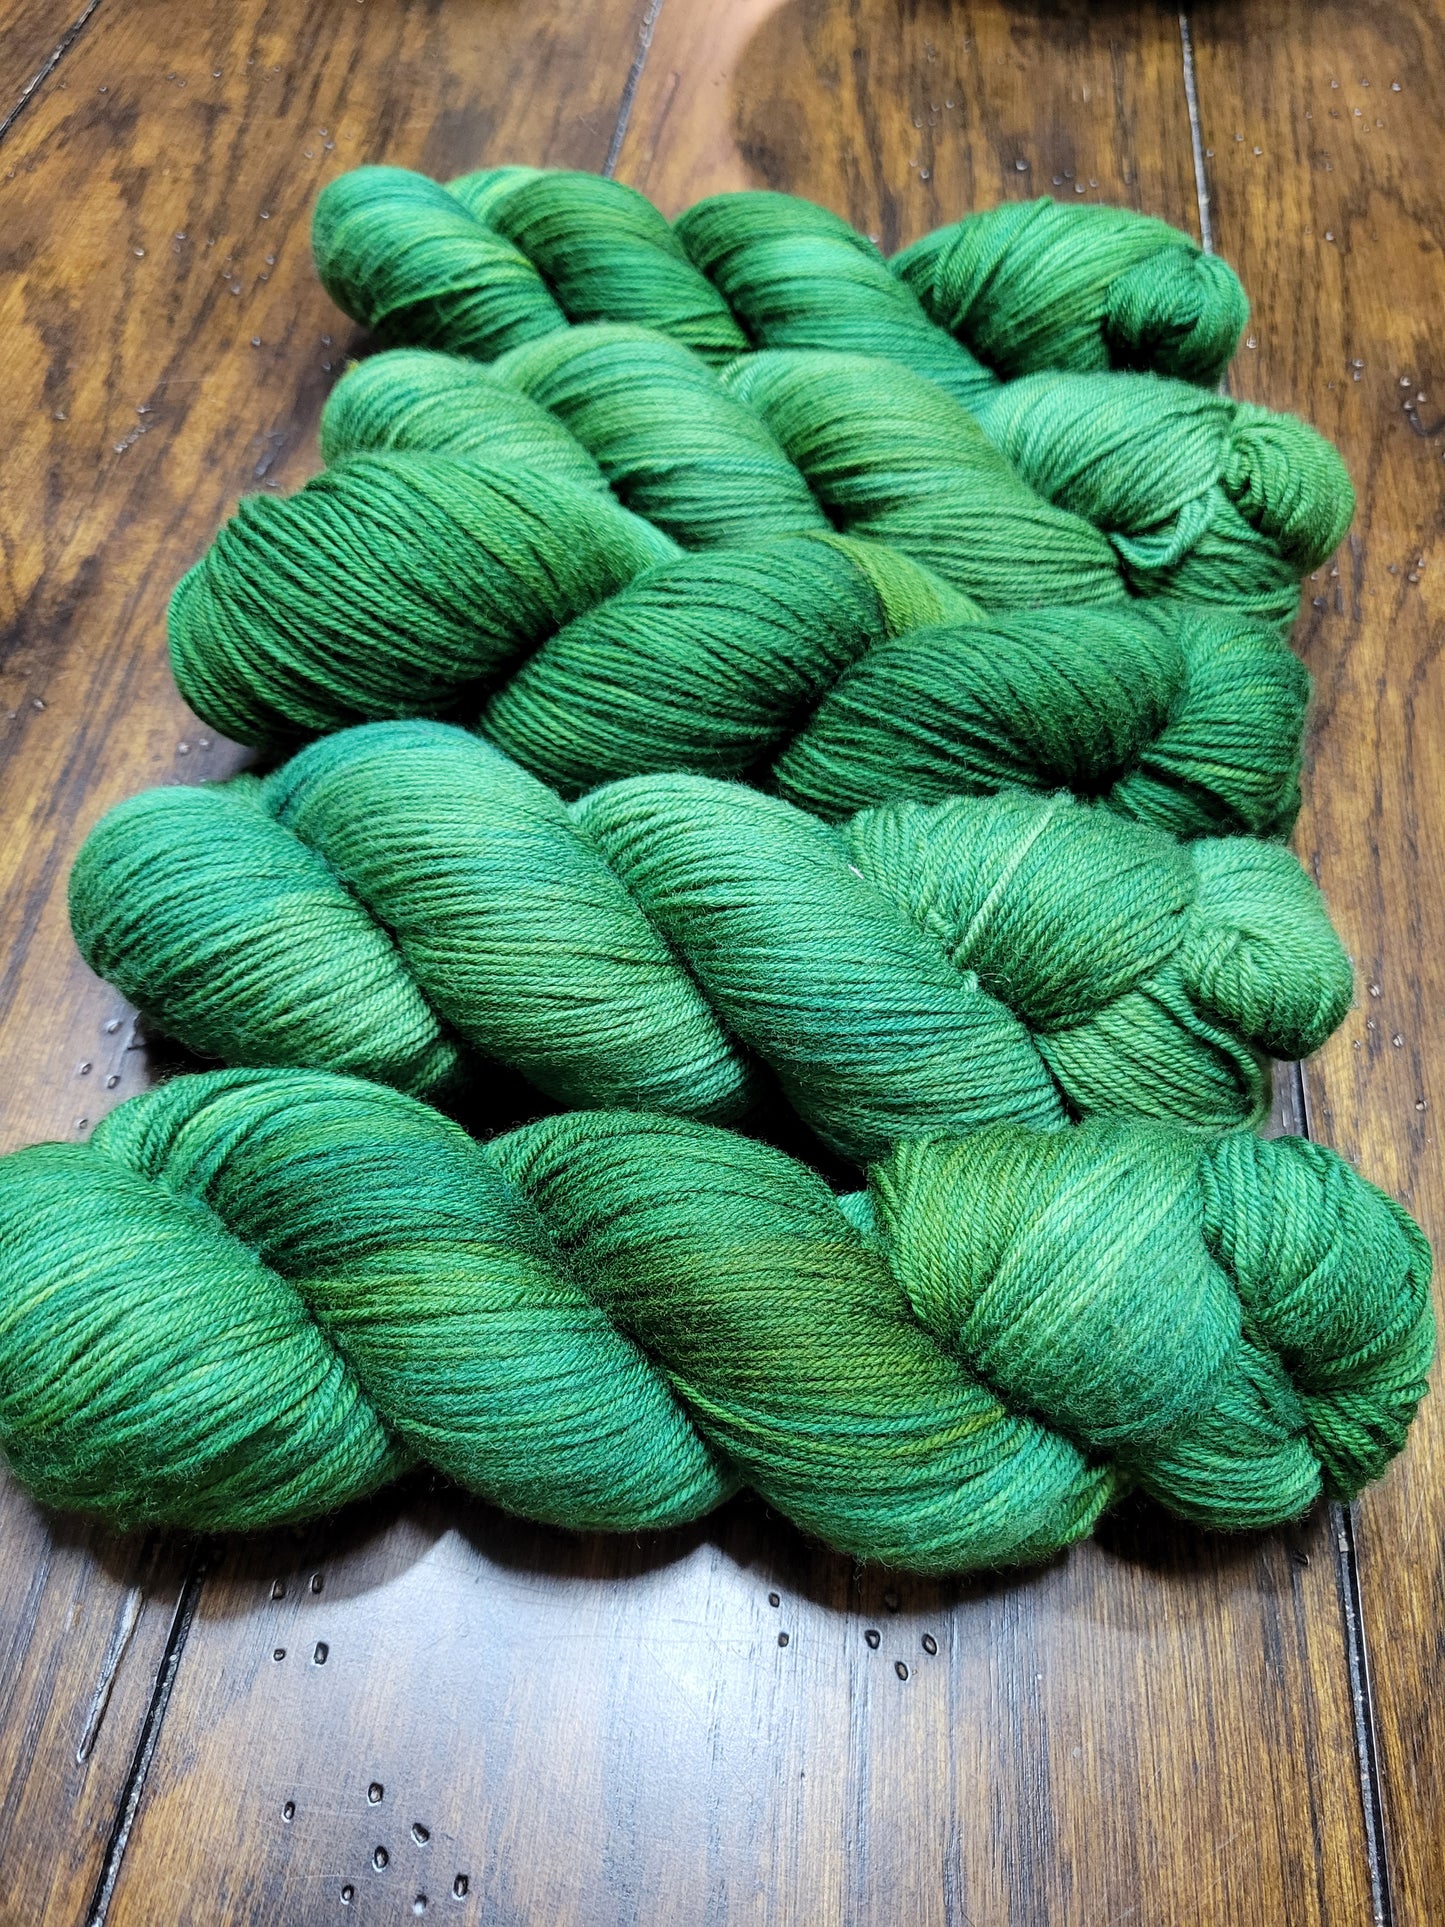 Hand Dyed Yarn - To Put it Bluntly, a Weed!